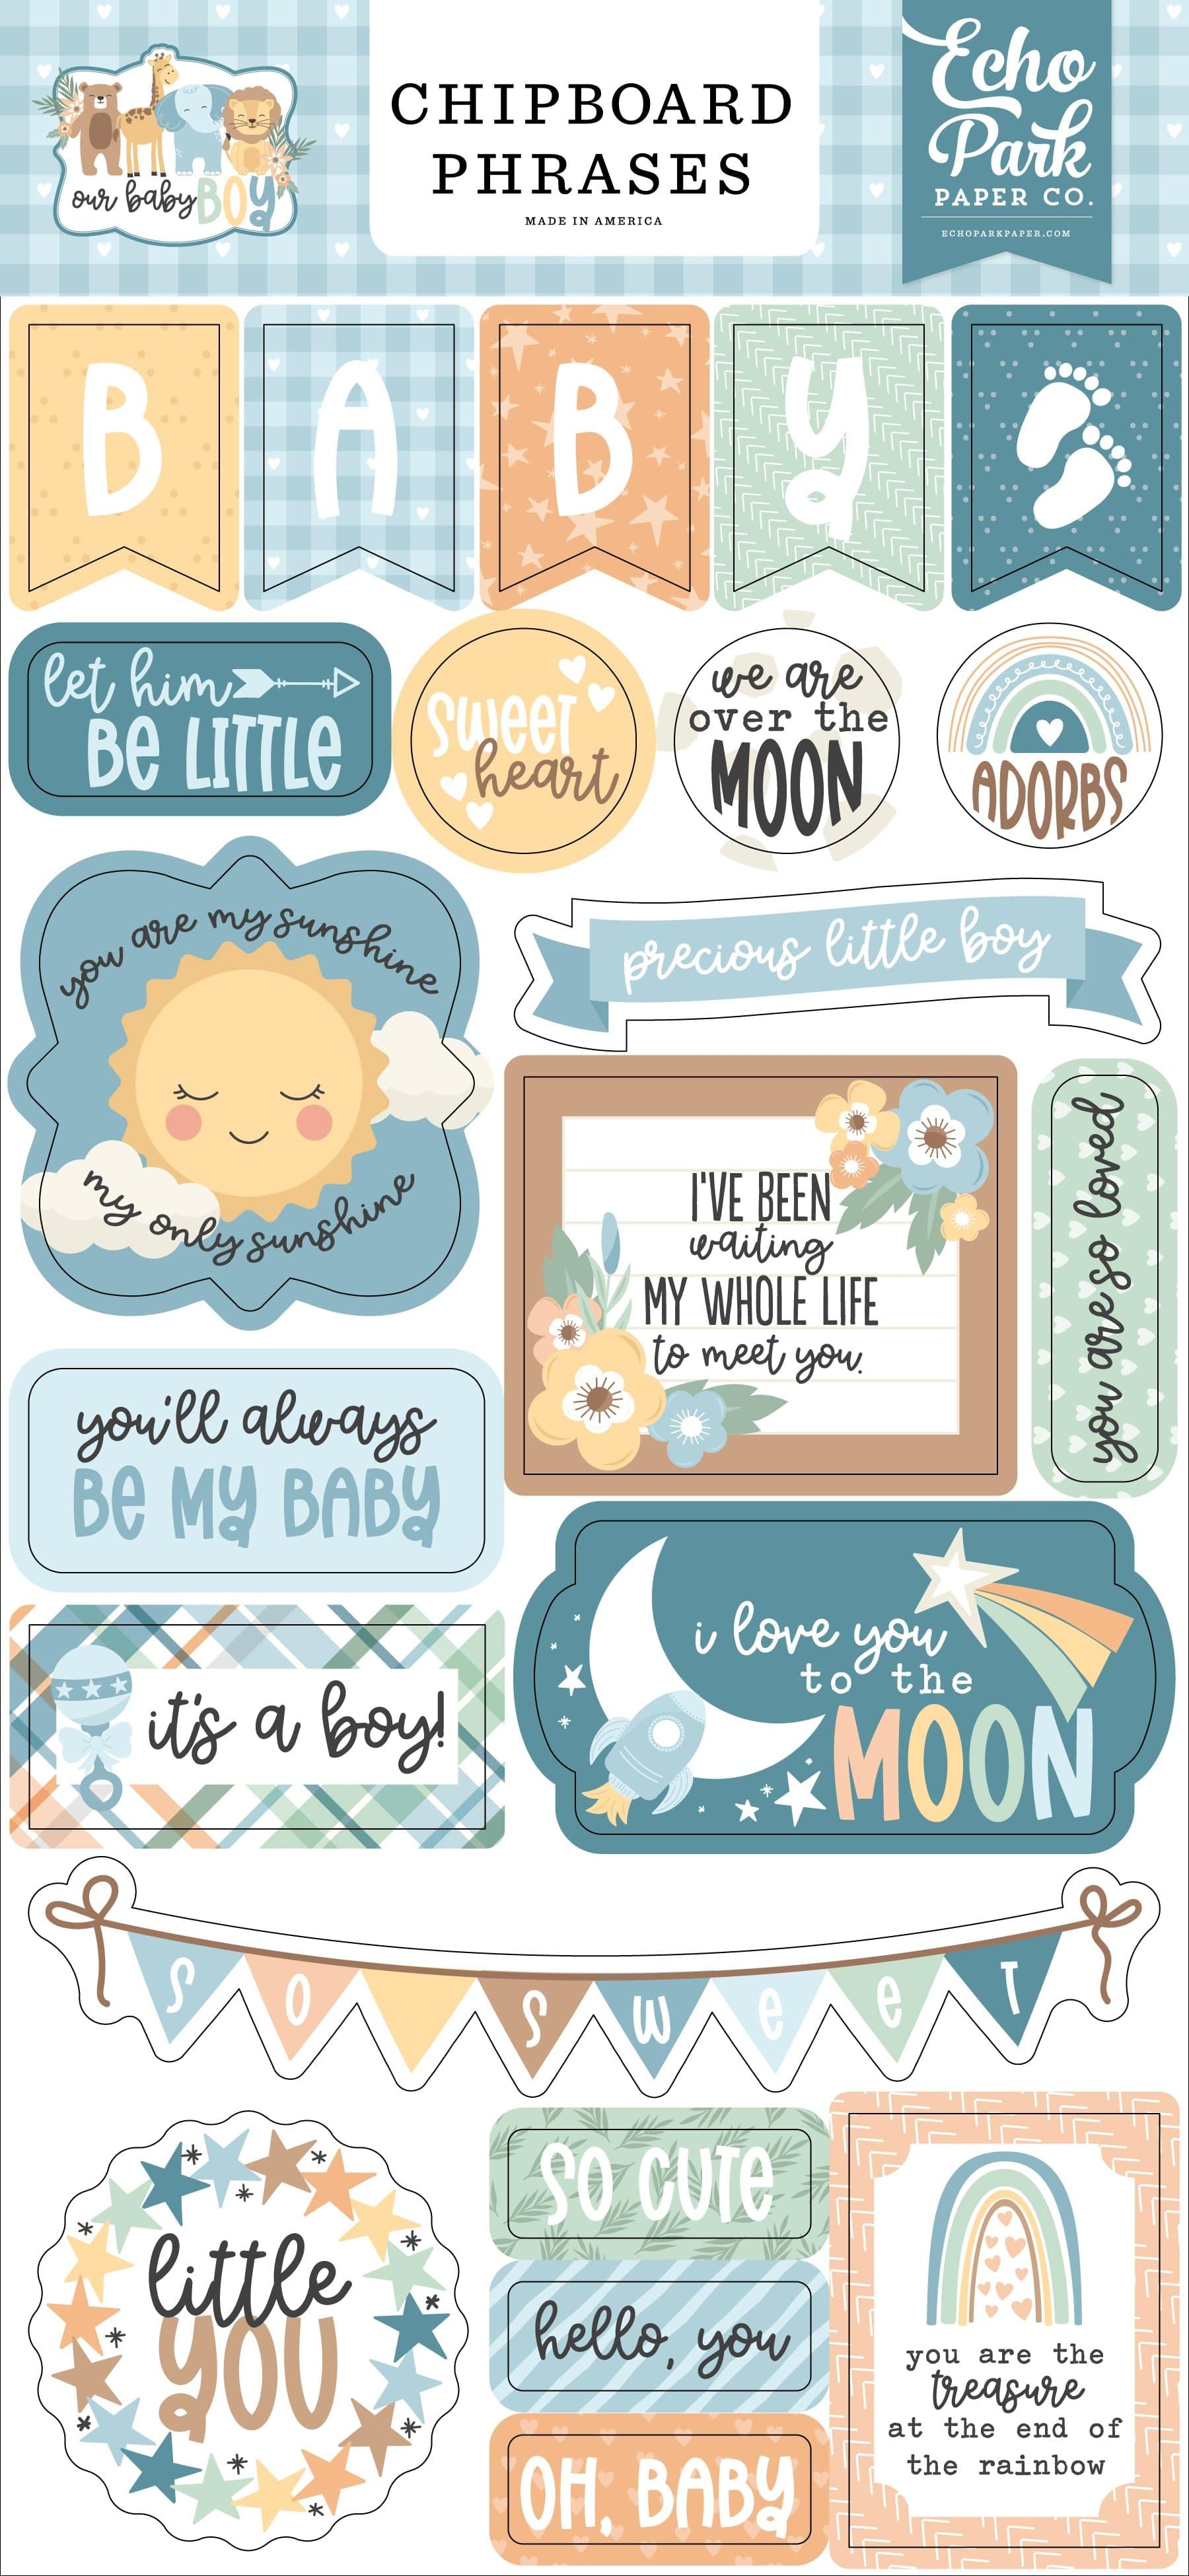 Our Baby Boy Collection 6 x 12 Scrapbook Chipboard Phrases by Echo Park Paper - Scrapbook Supply Companies